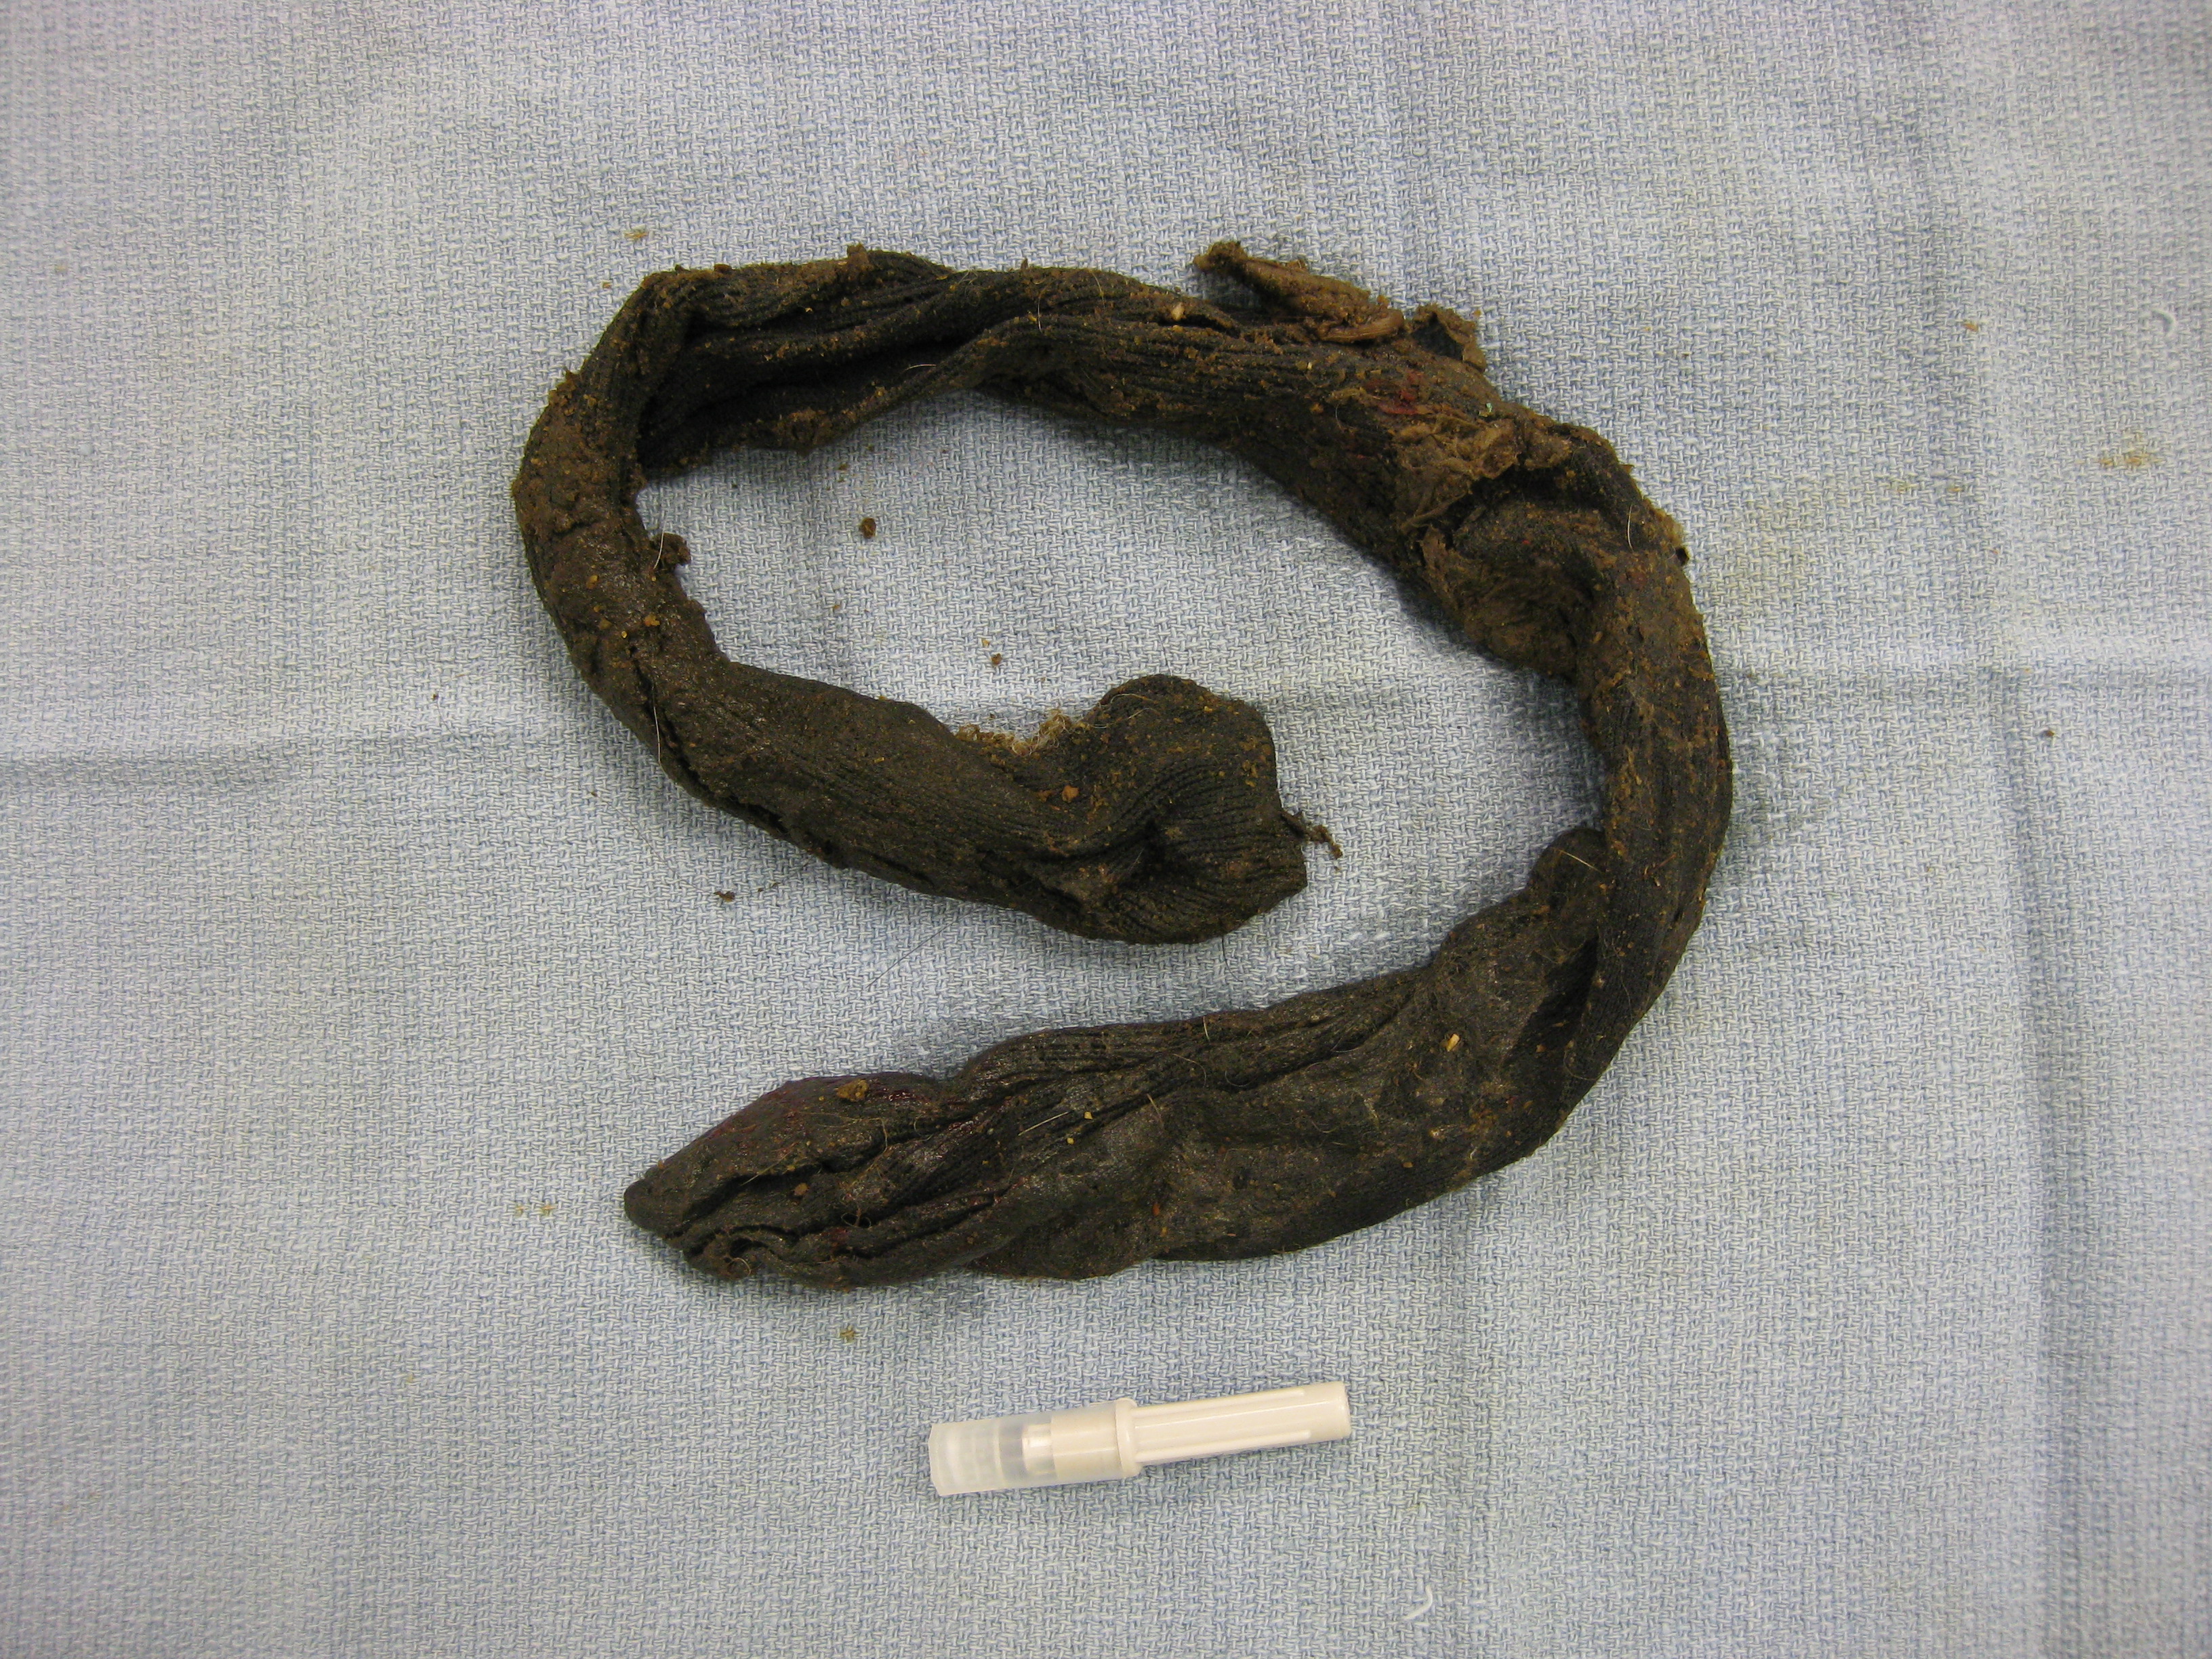 Sock removed from the intestine of a 4 year old German Shepherd